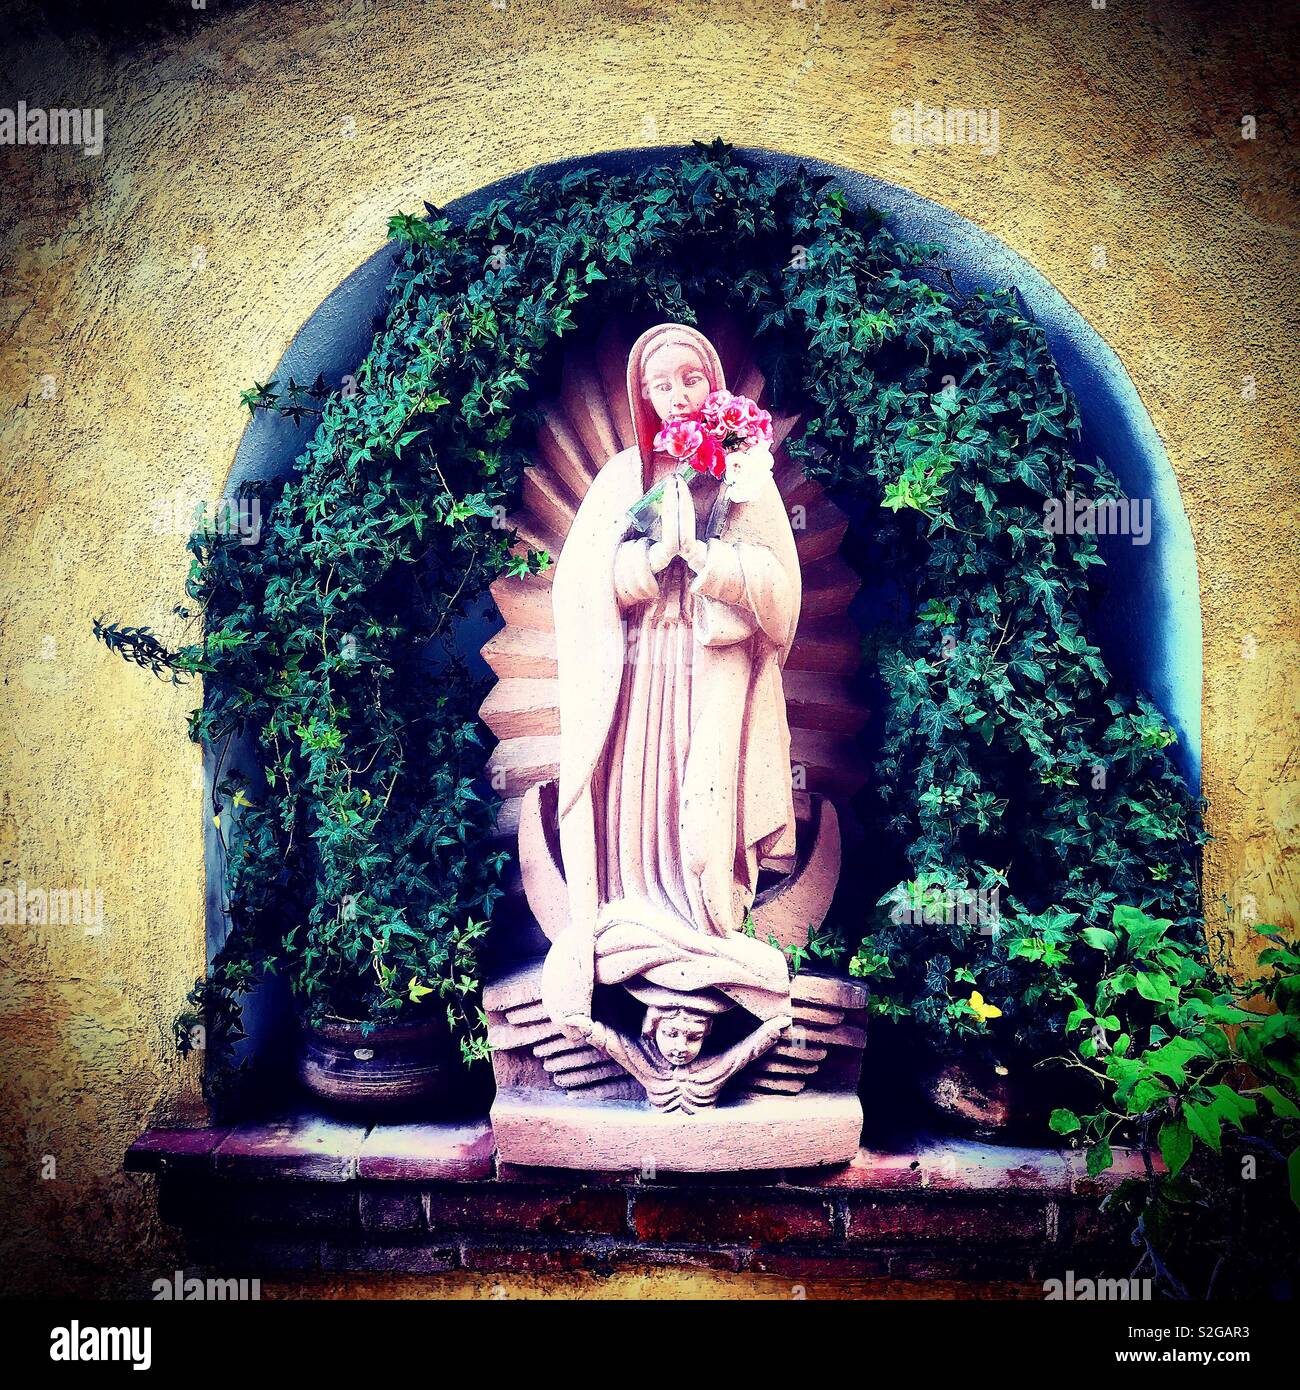 A sculpture of Our Lady of Guadalupe holding roses decorates an altar in Hotel la Plaza in Tequisquiapan, Queretaro, Mexico Stock Photo